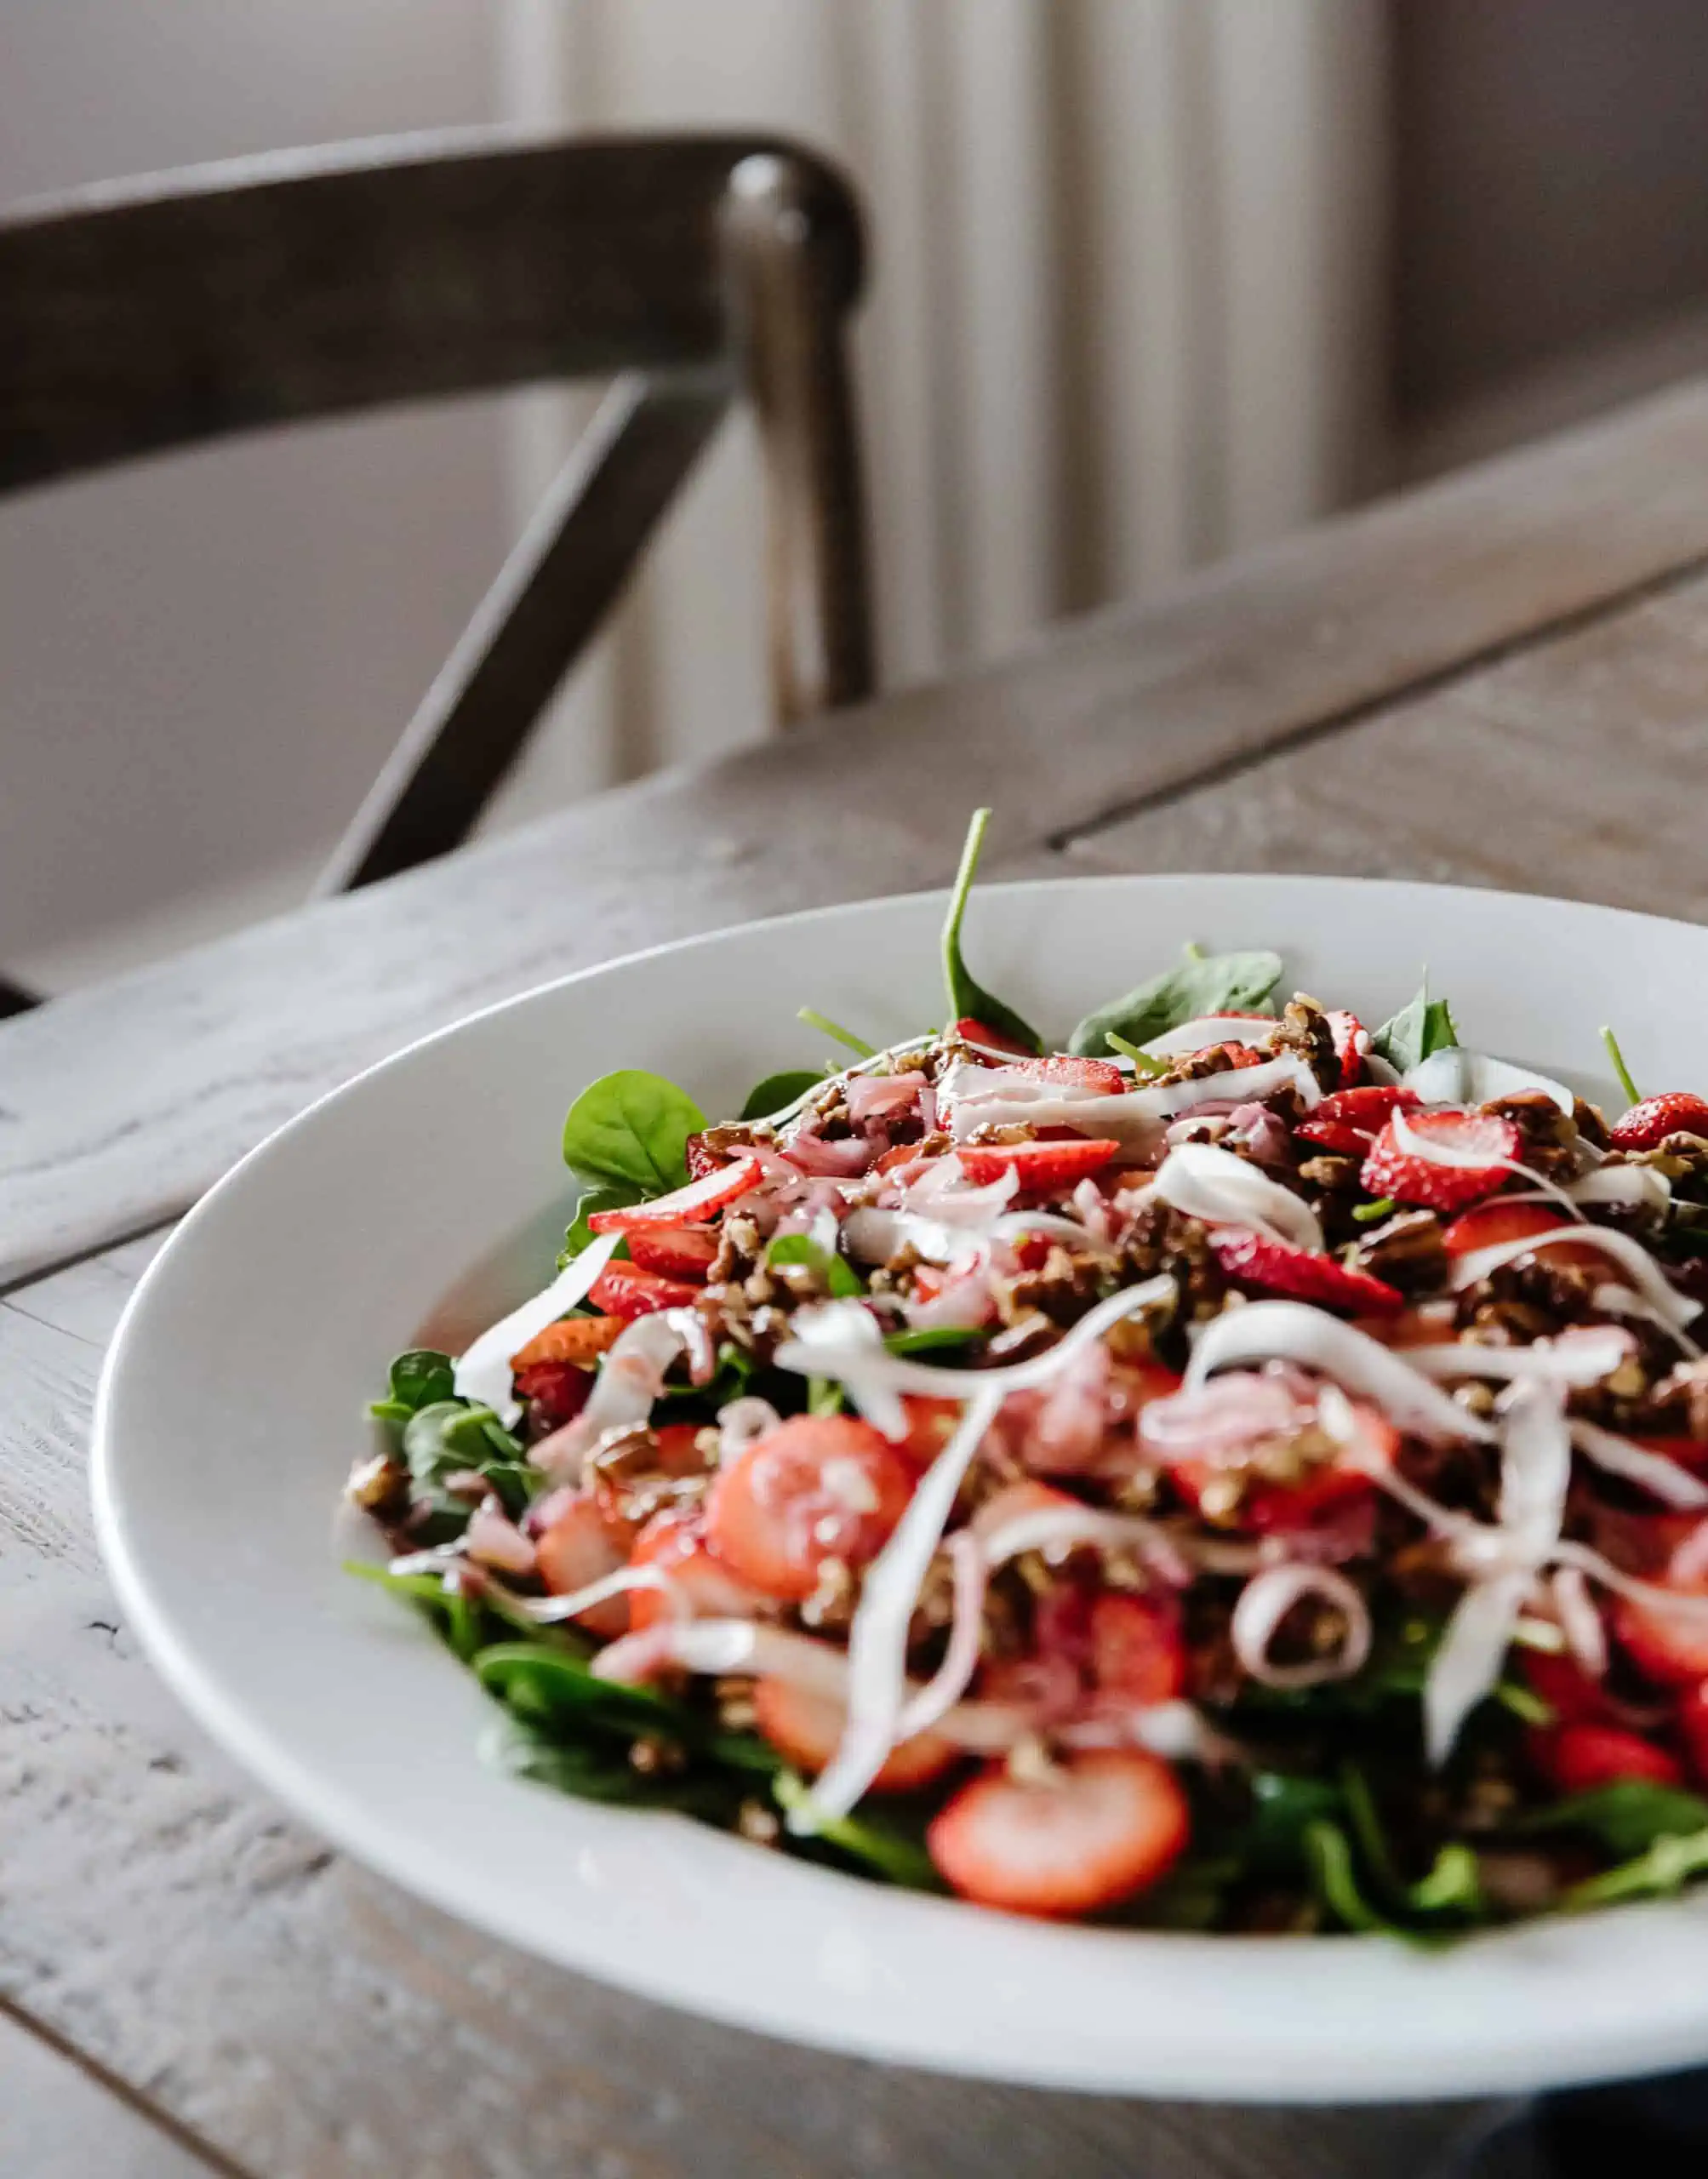 view of strawberry spinach salad in a large white bowl on a wooden table with a chair in the background